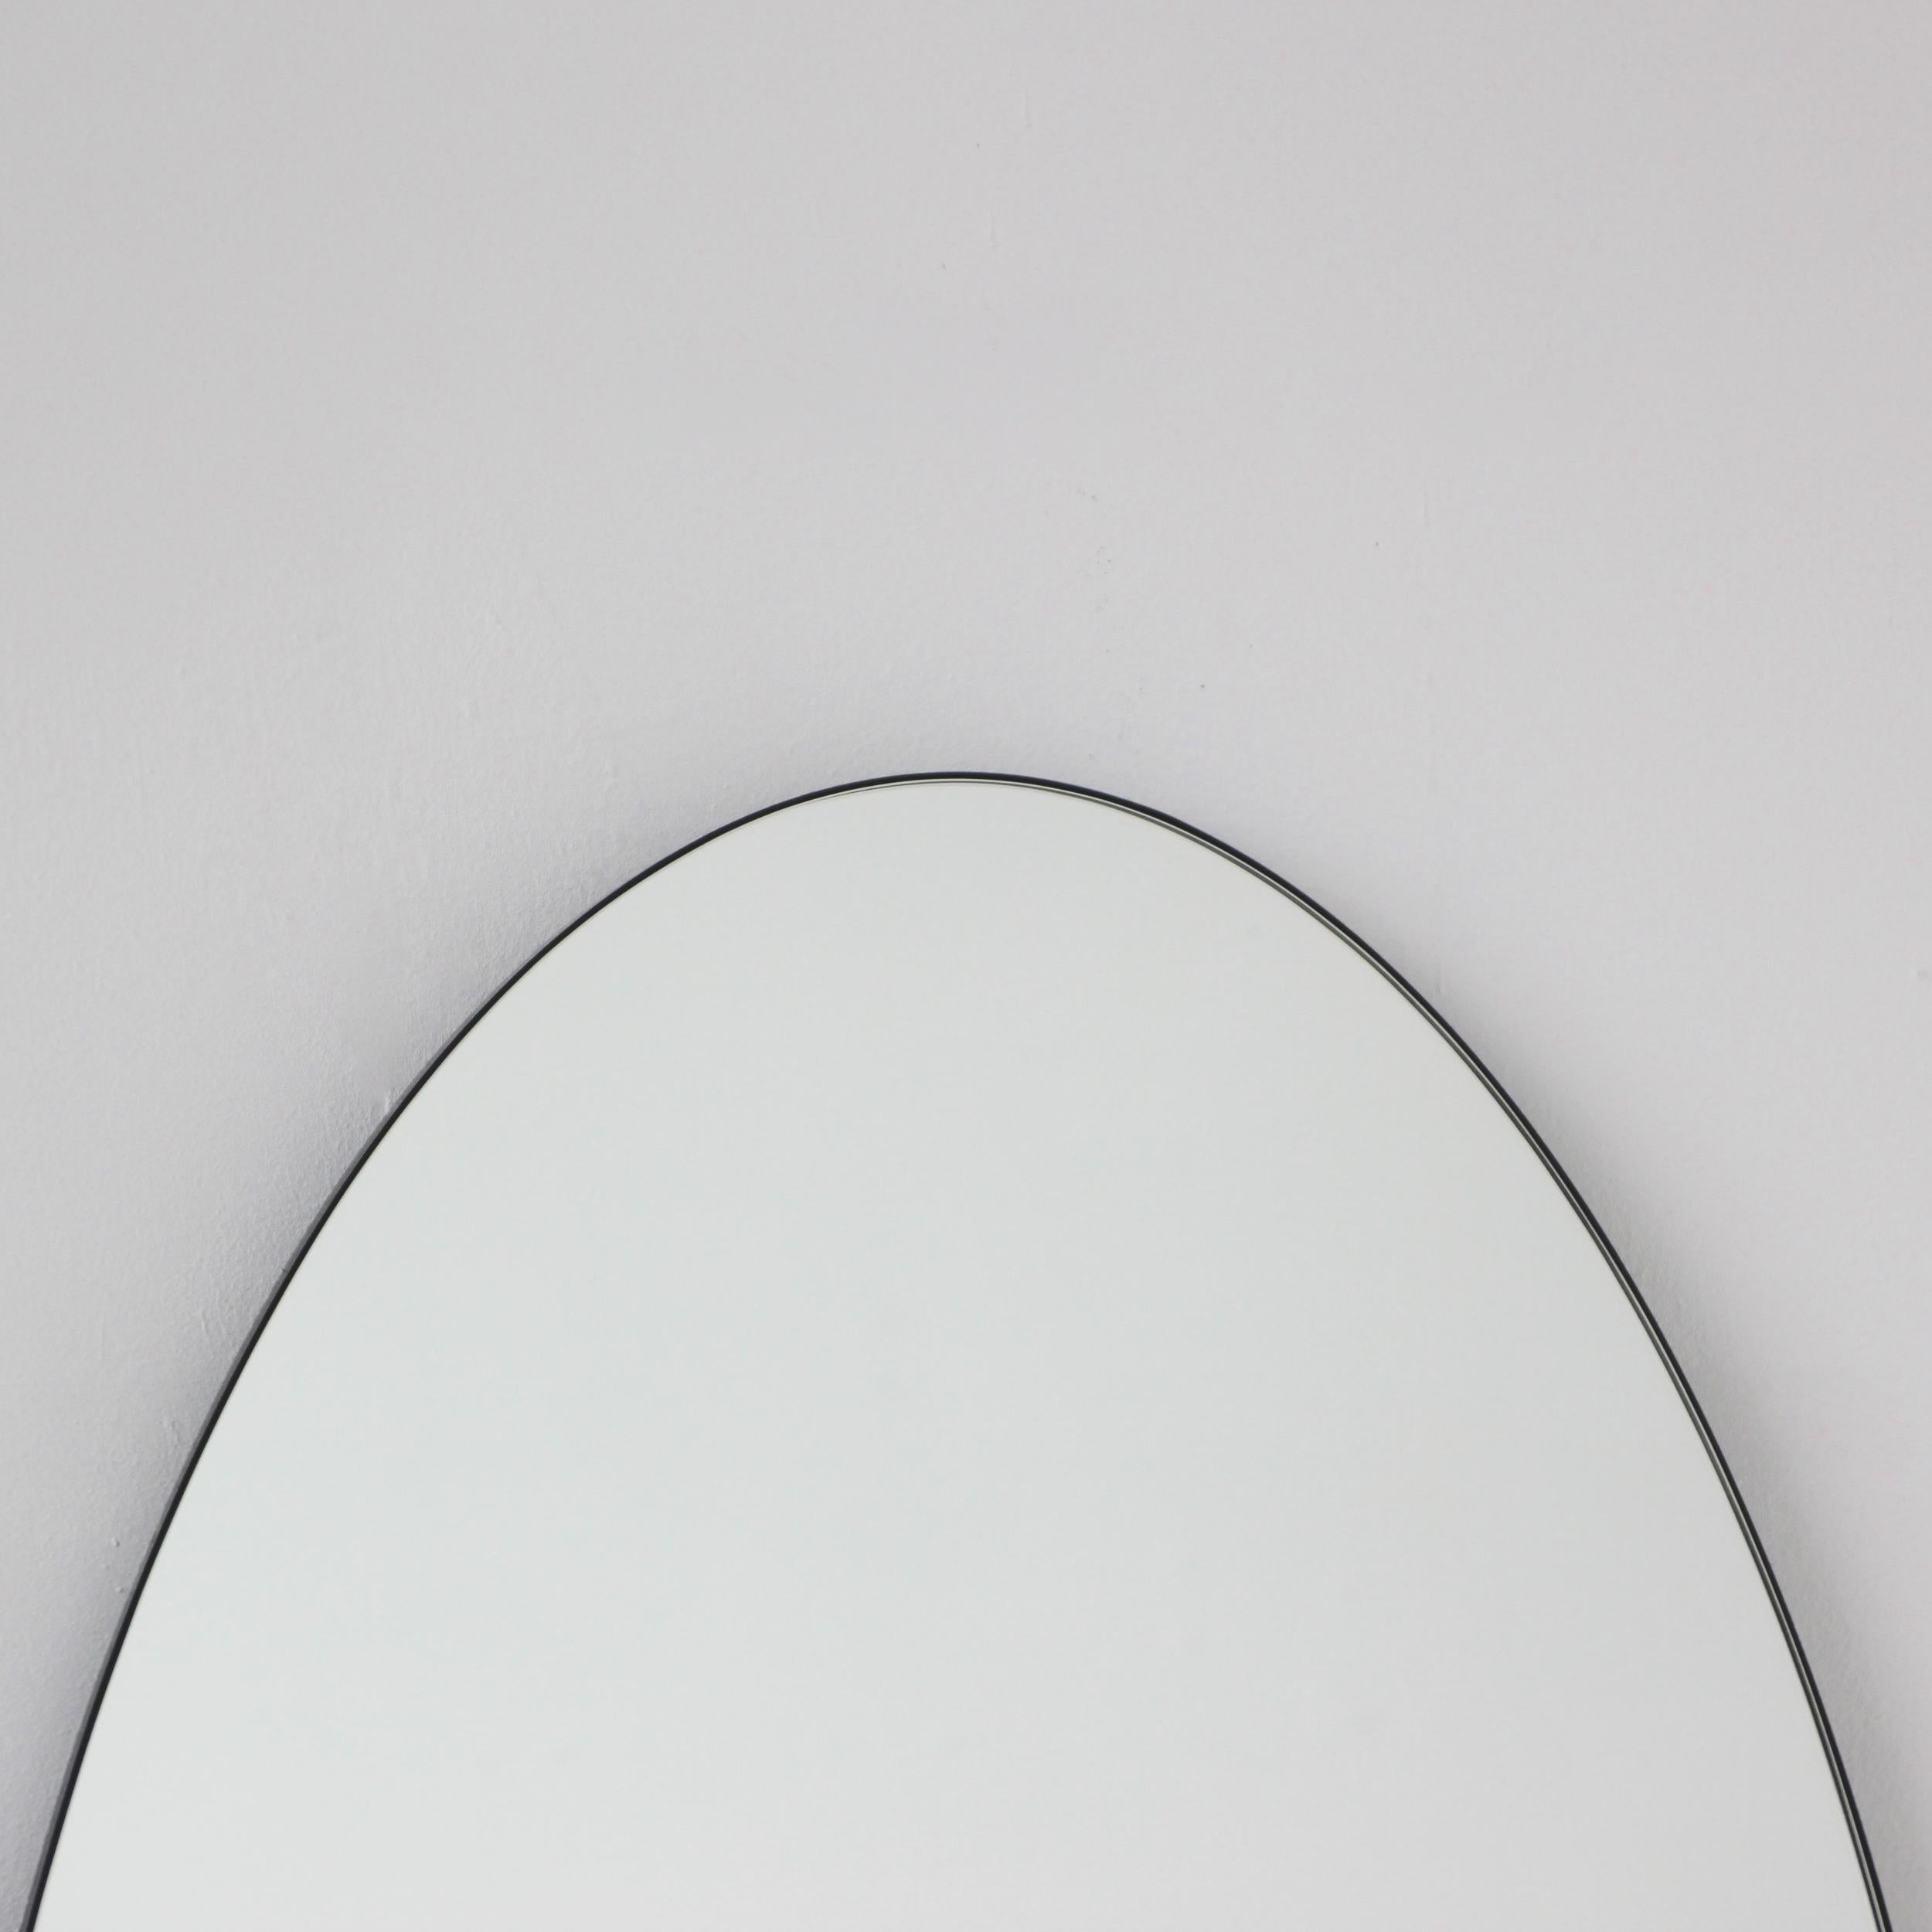 Ovalis Oval Minimalist Mirror with Elegant Black Frame, Large In New Condition For Sale In London, GB